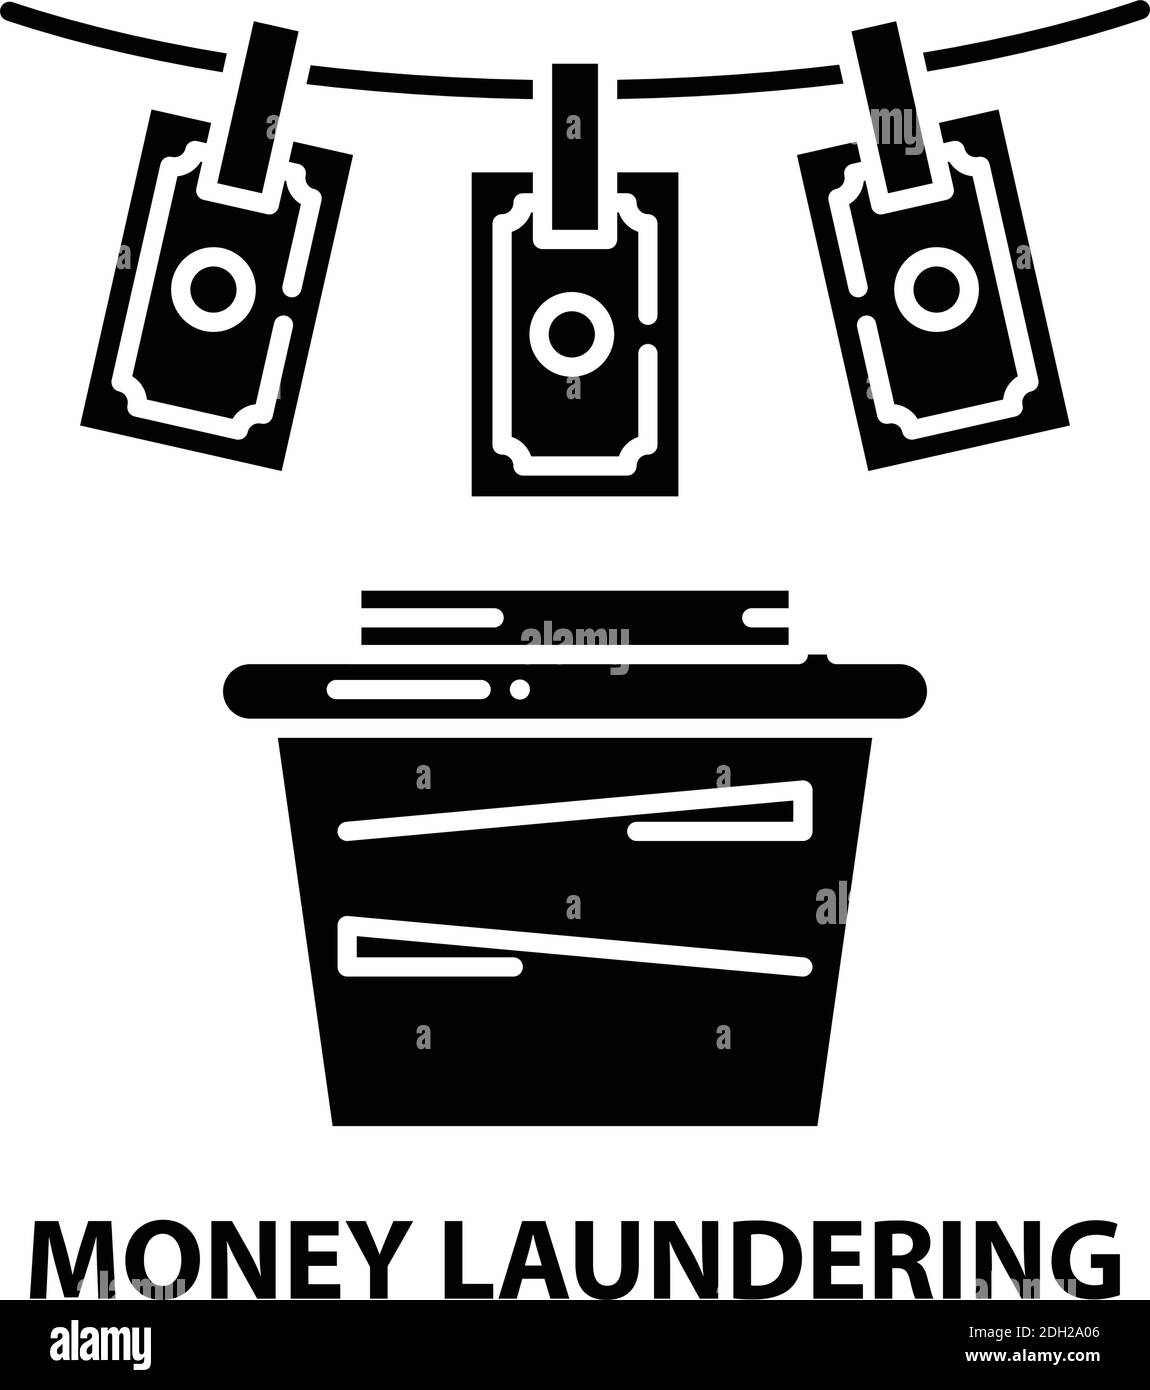 money laundering icon, black vector sign with editable strokes, concept illustration Stock Vector